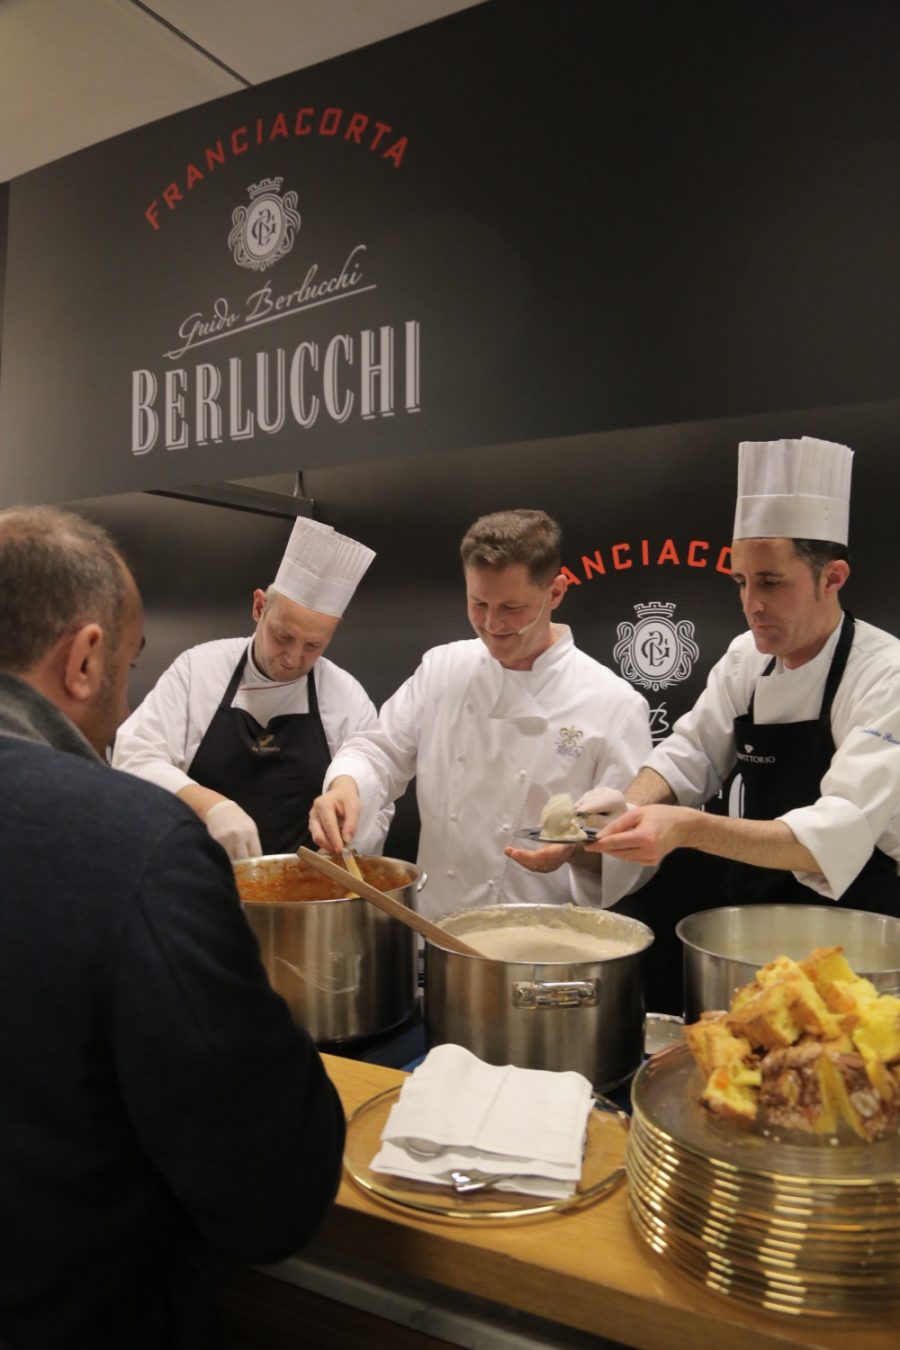 Chicco Cerea and his brigade from Da Vittorio serving guests at the Berlucchi bar in 2016